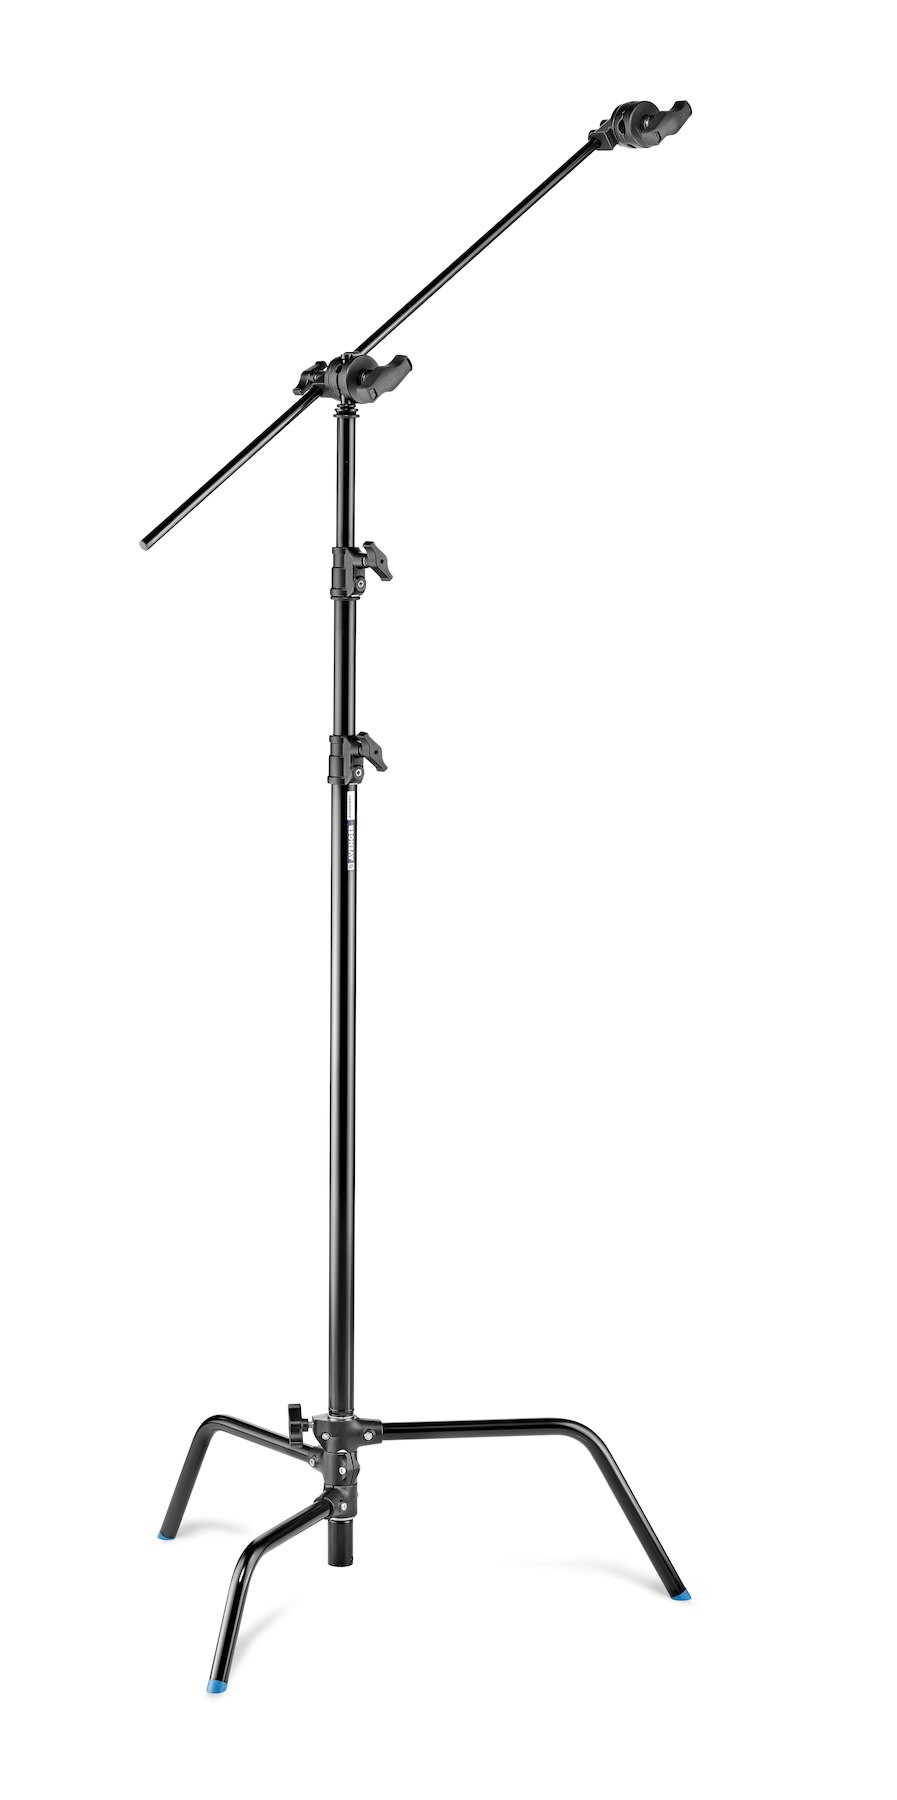 Avenger C-Stand Kit 30 with detachable base